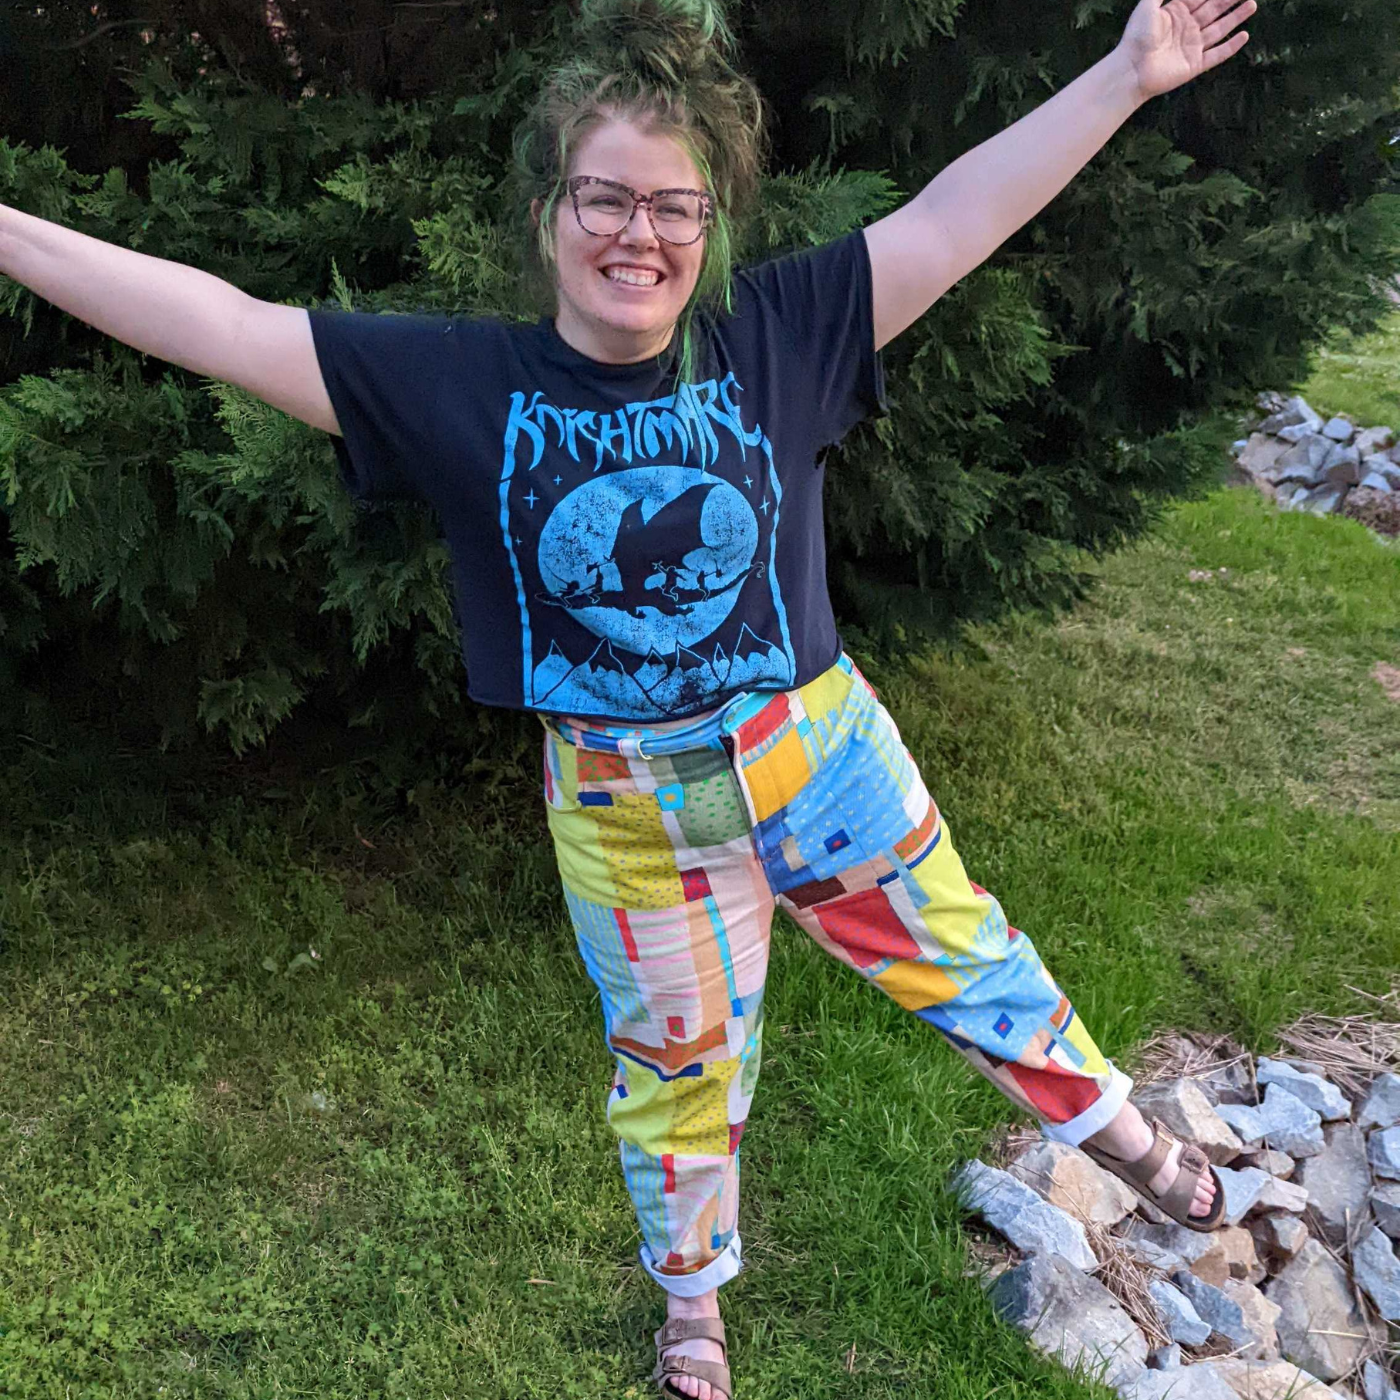 Nikki stands in front of the camera and is laughing. She is wearing a shirt for the band Knightmare and wearing pants featuring a design that looks like patchwork. Small squares and rectangles in varied sizes cover the design in yellow, red, blue, green and more Some blocks have stripes, others have dots. Her right hand is on her hip.